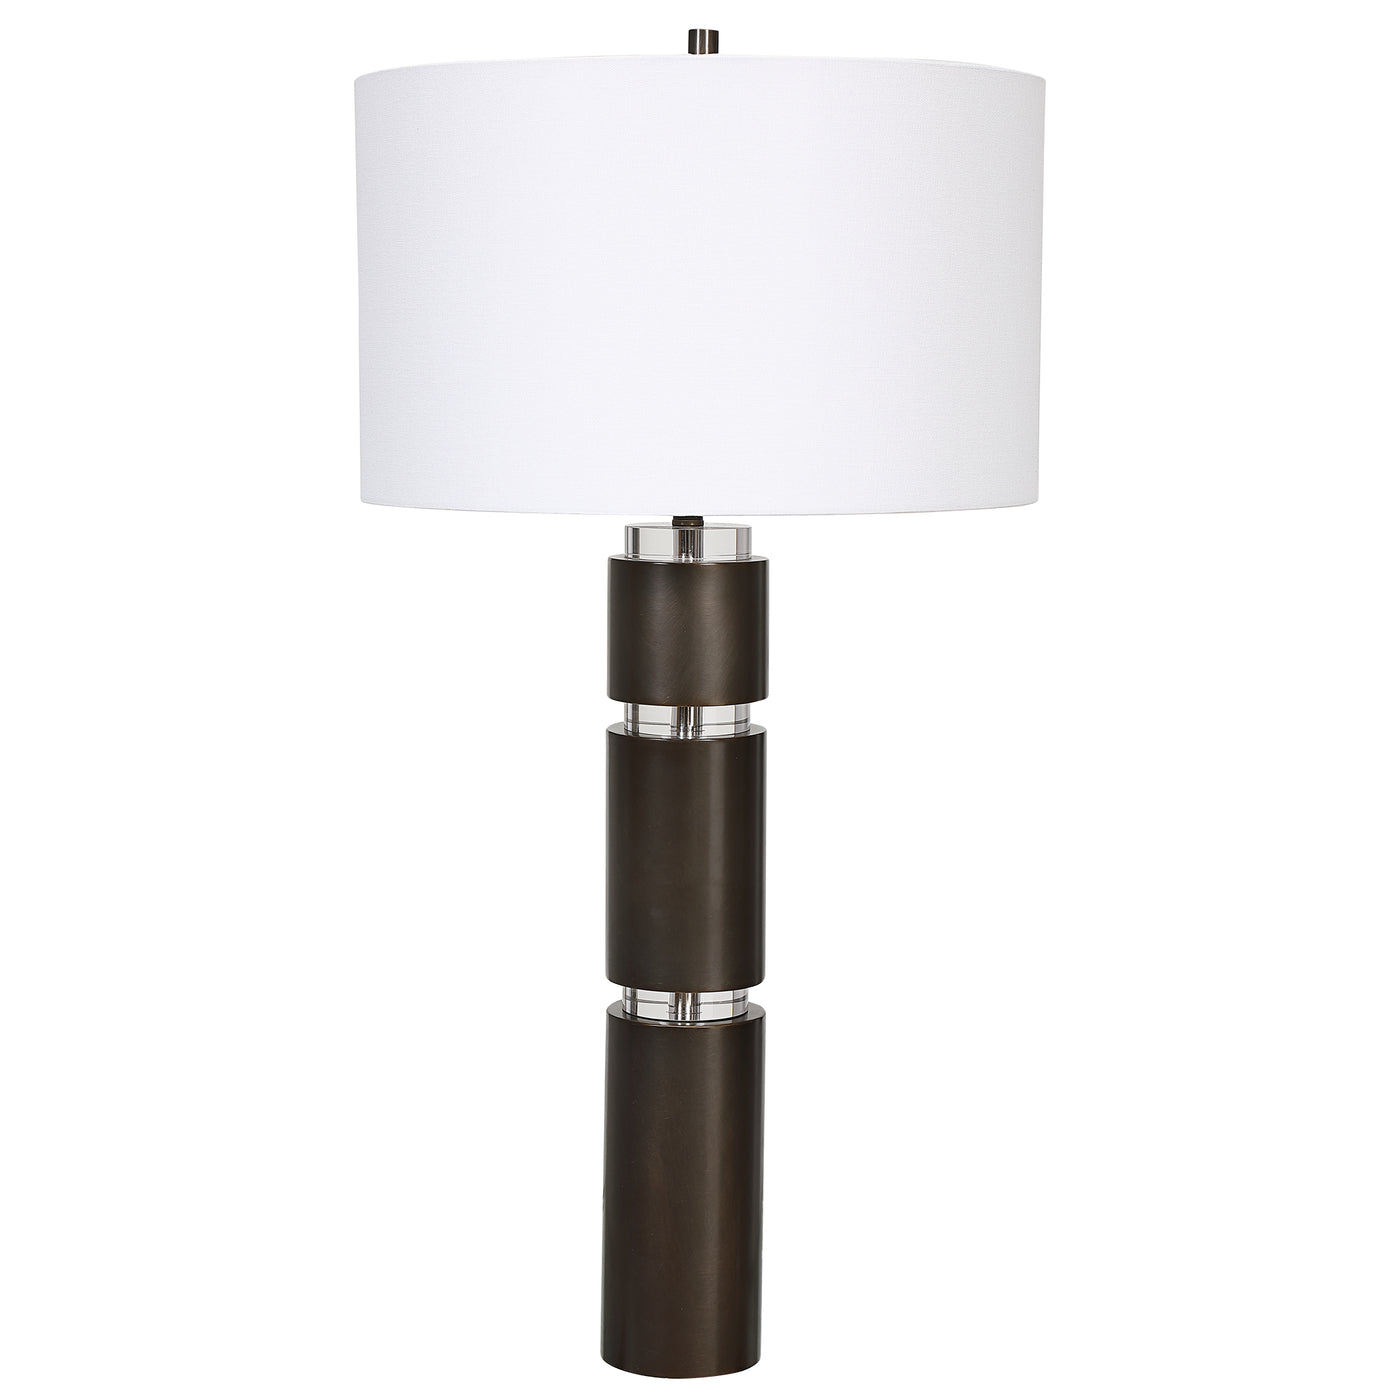 This Table Lamp Features A Sophisticated Design By Pairing Stacked Steel Columns In A Dark Bronze Finish With Elegant Crys...